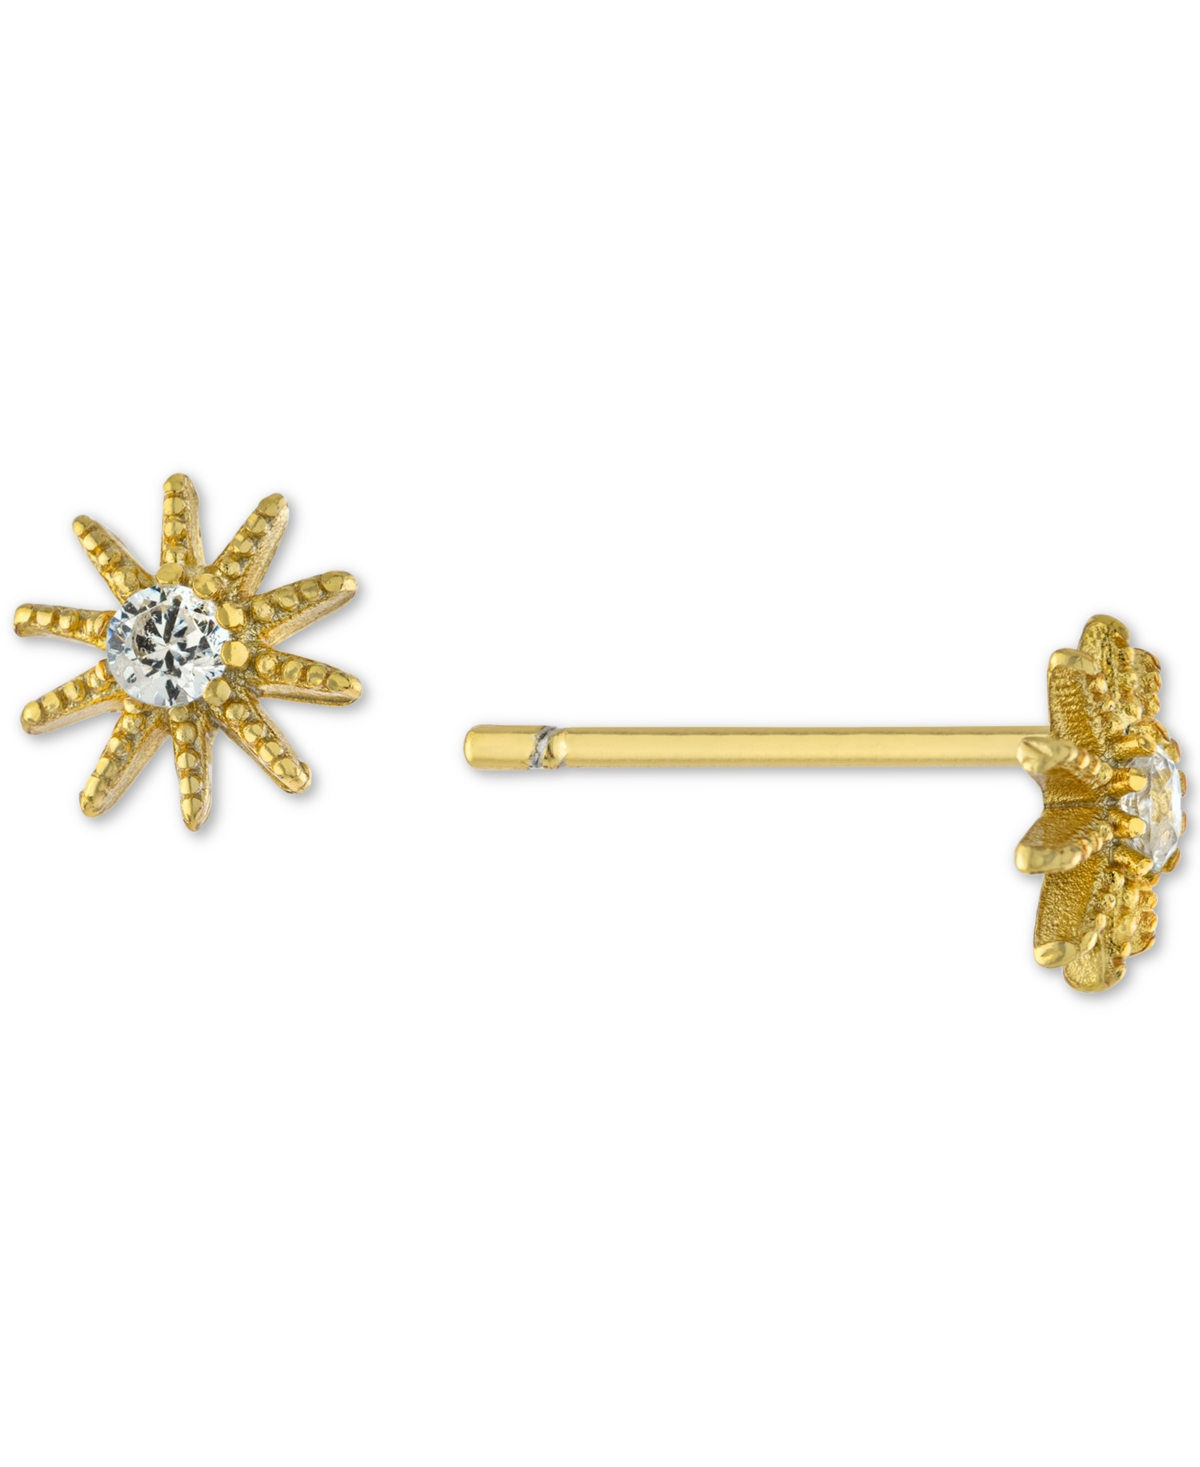 Cubic Zirconia Sun Stud Earrings in Gold-Plated Sterling Silver, Created for Macy's - Yellow